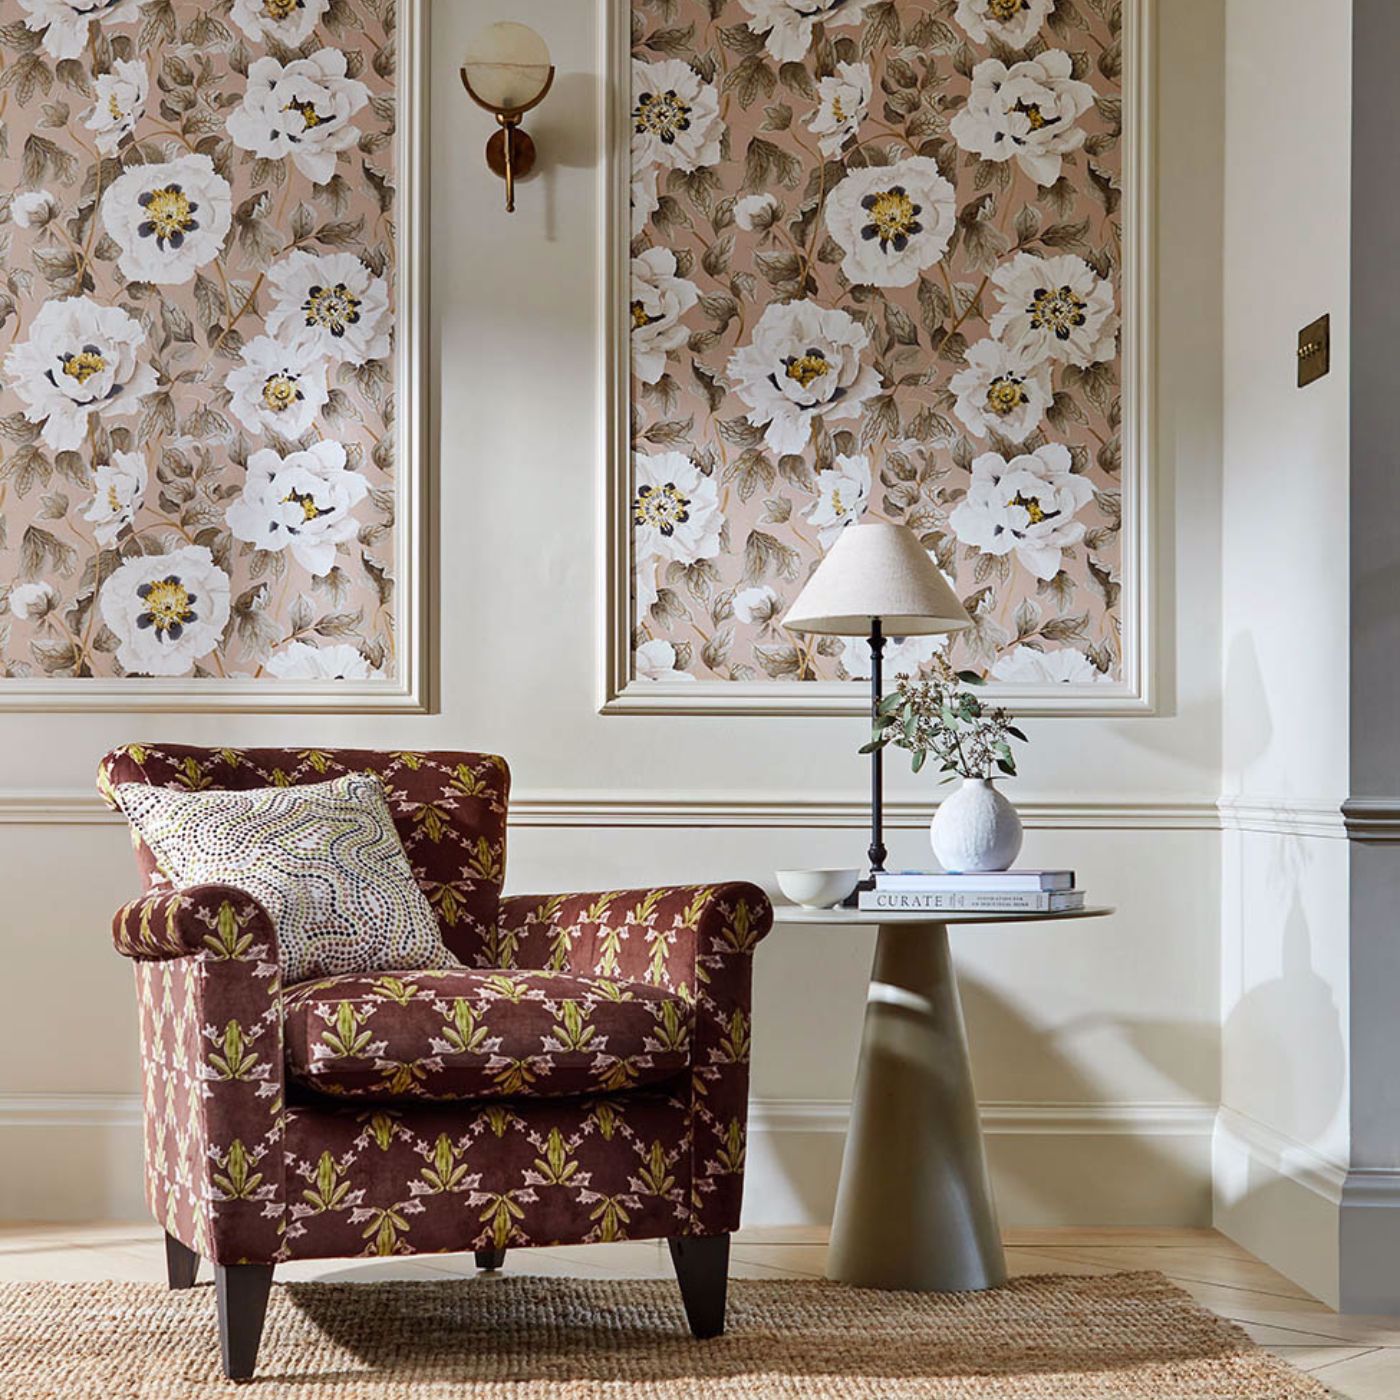 LN11104 Southport Floral Trail Lillian August Luxe Retreat Wallpaper